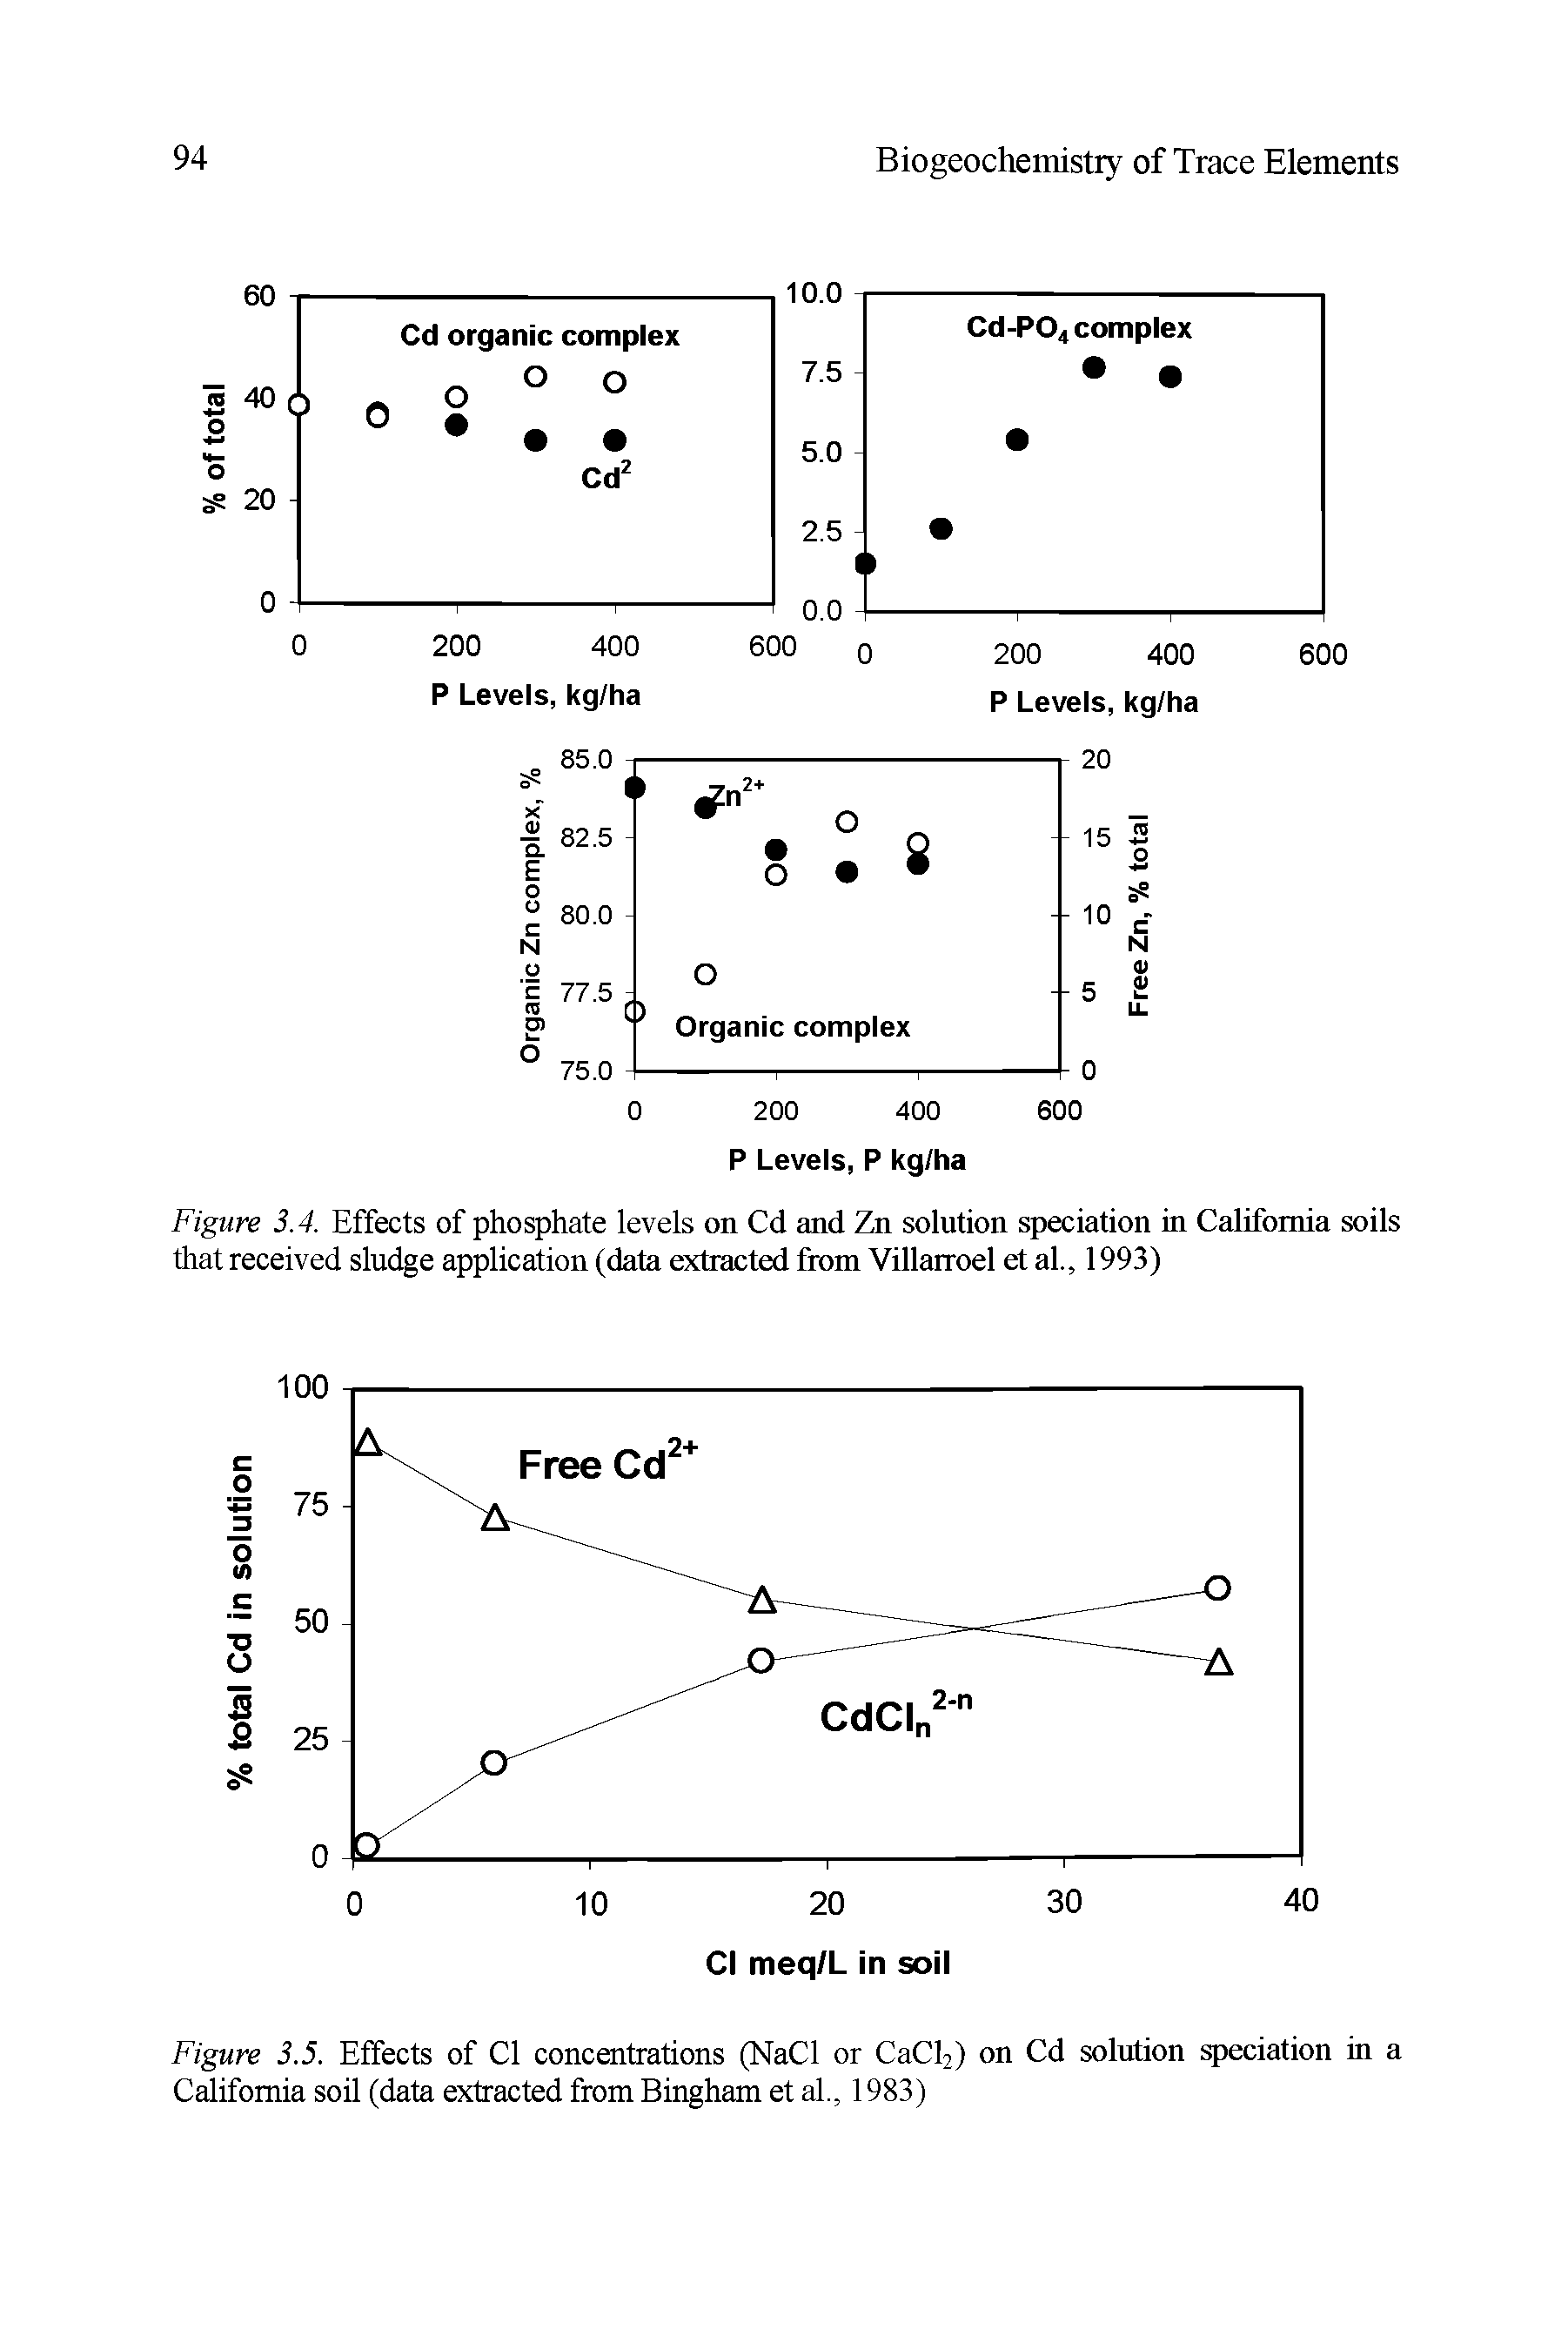 Figure 3.5. Effects of Cl concentrations (NaCl or CaCl2) on Cd solution speciation in a California soil (data extracted from Bingham et al., 1983)...